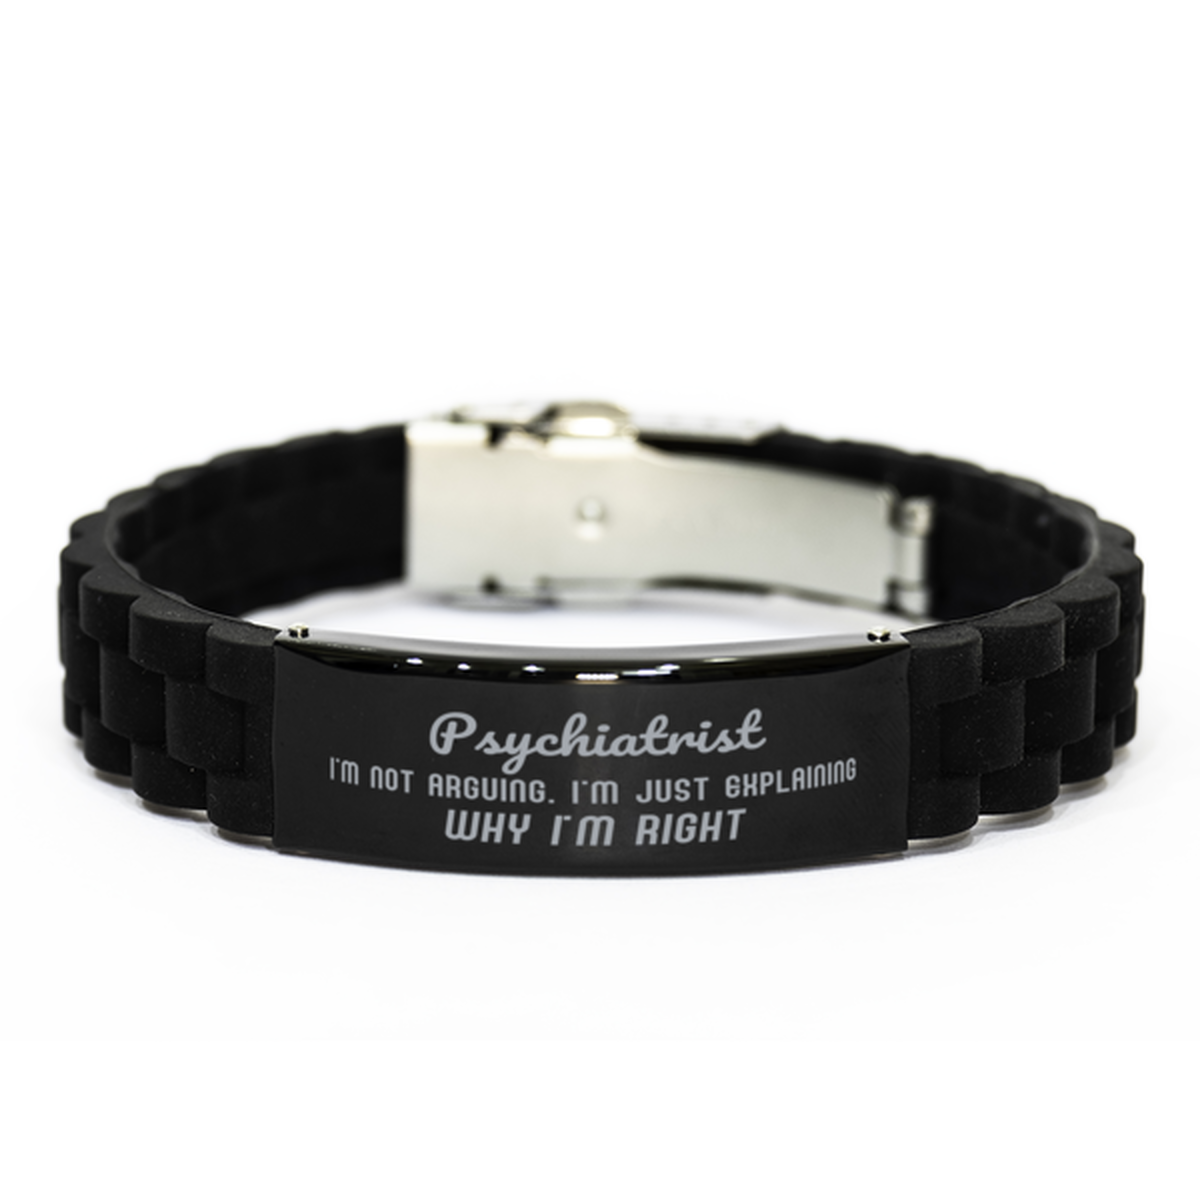 Psychiatrist I'm not Arguing. I'm Just Explaining Why I'm RIGHT Black Glidelock Clasp Bracelet, Funny Saying Quote Psychiatrist Gifts For Psychiatrist Graduation Birthday Christmas Gifts for Men Women Coworker